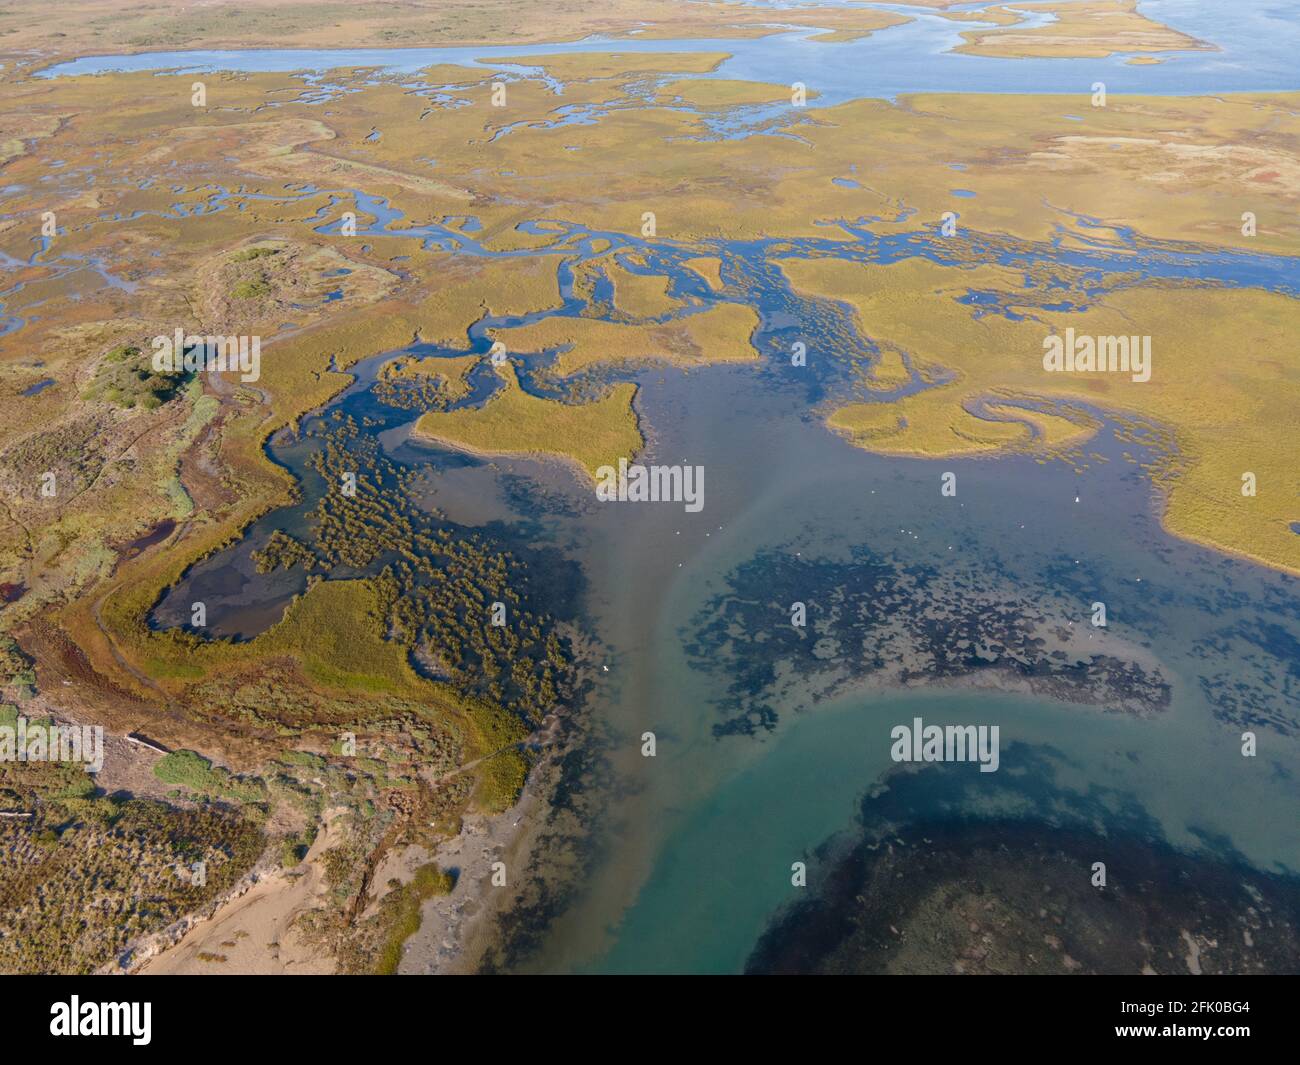 Drone view of wetlands seen from high angle Stock Photo